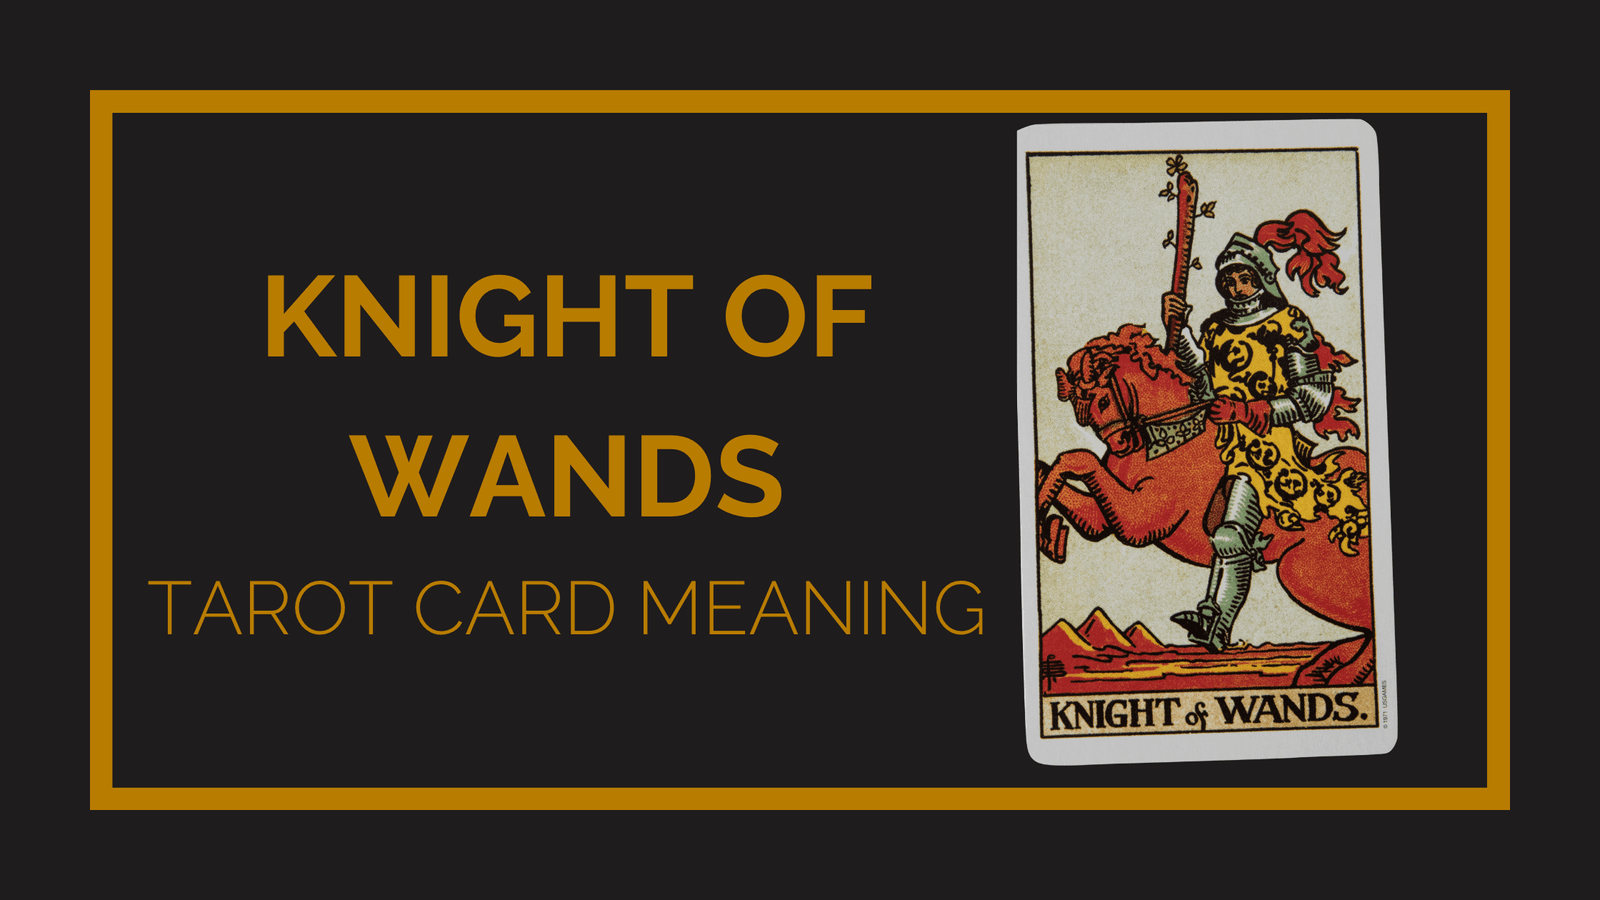 Knight of wands tarot card meaning | tarot with gord